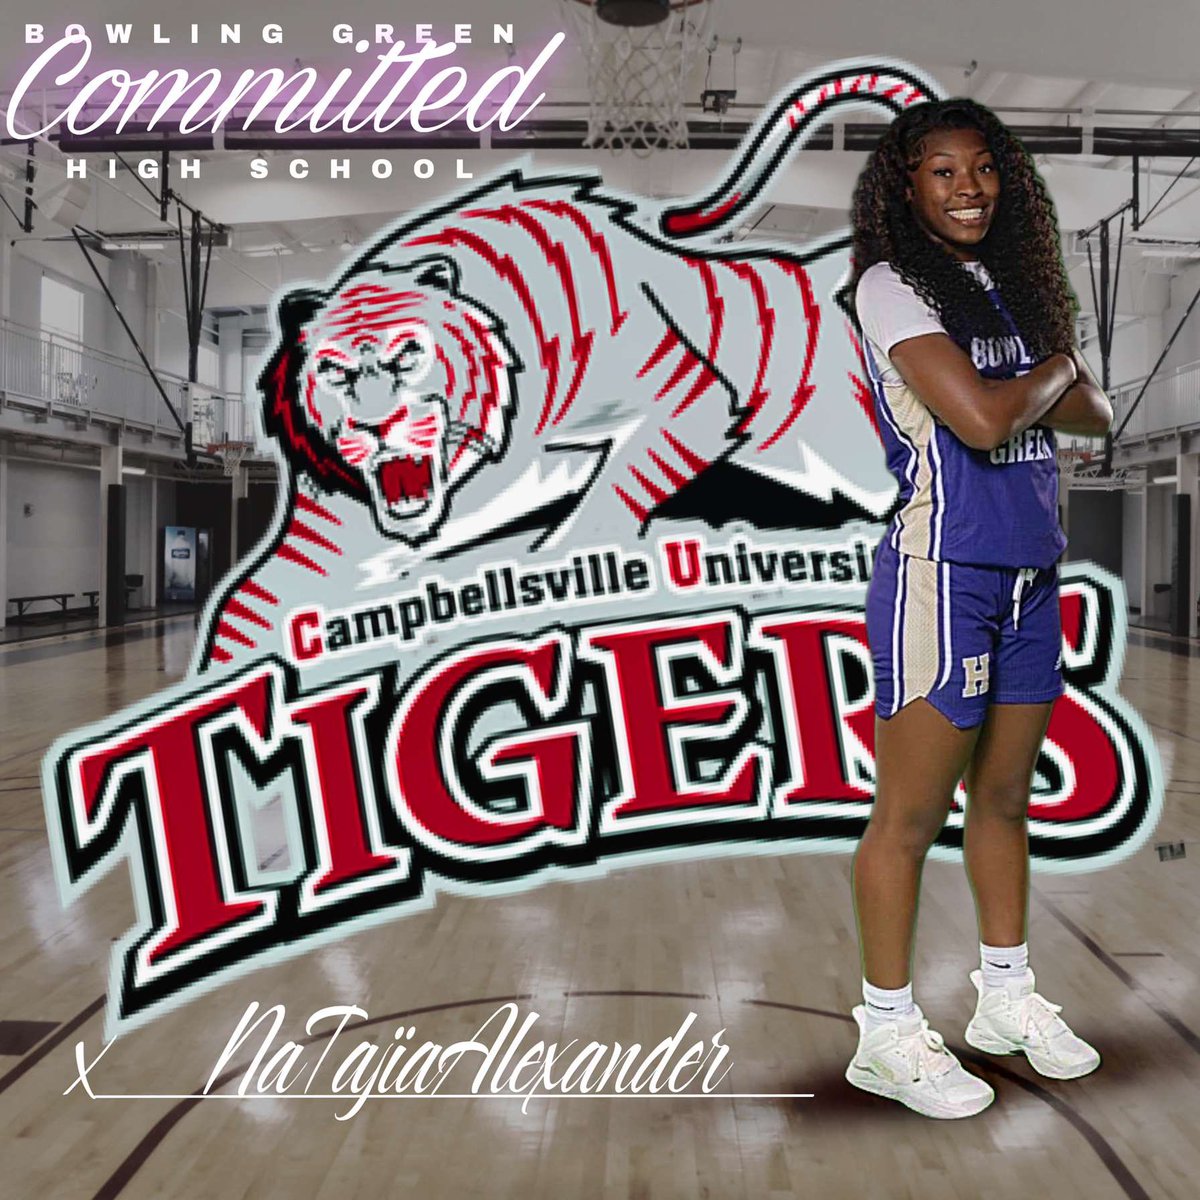 ….I will be continuing my academic and athletic career at Campbellsville University with @LTB_CU. Thank you for this opportunity. I am looking forward to this next chapter!!🤗